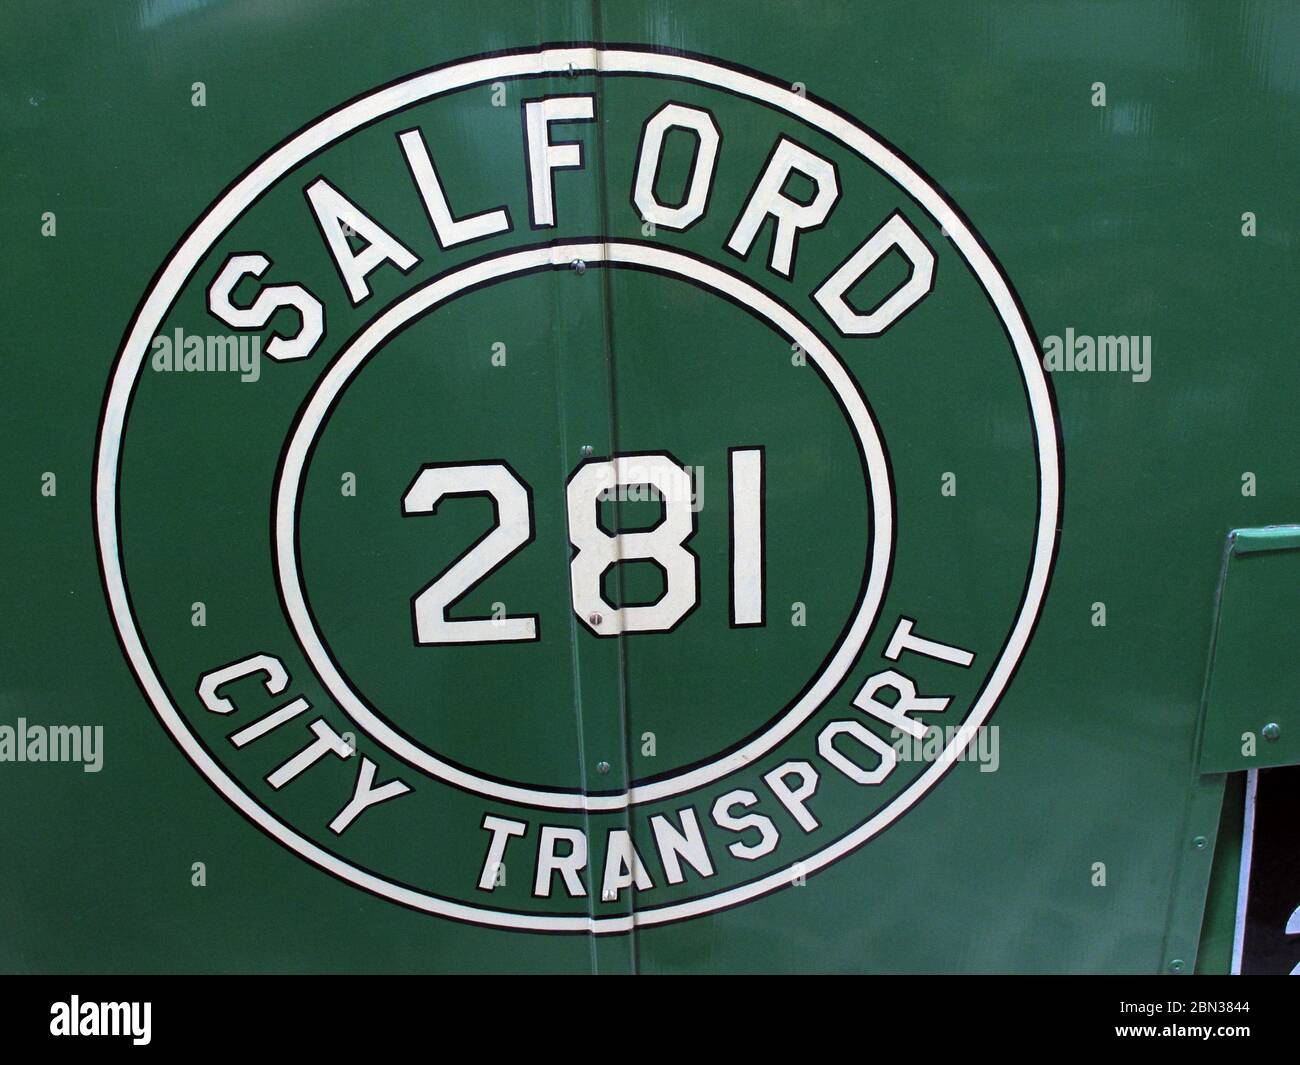 Salford City Transport,bus,omnibus,281, in green,Greater Manchester,Lancashire,England,UK,historic transport Stock Photo